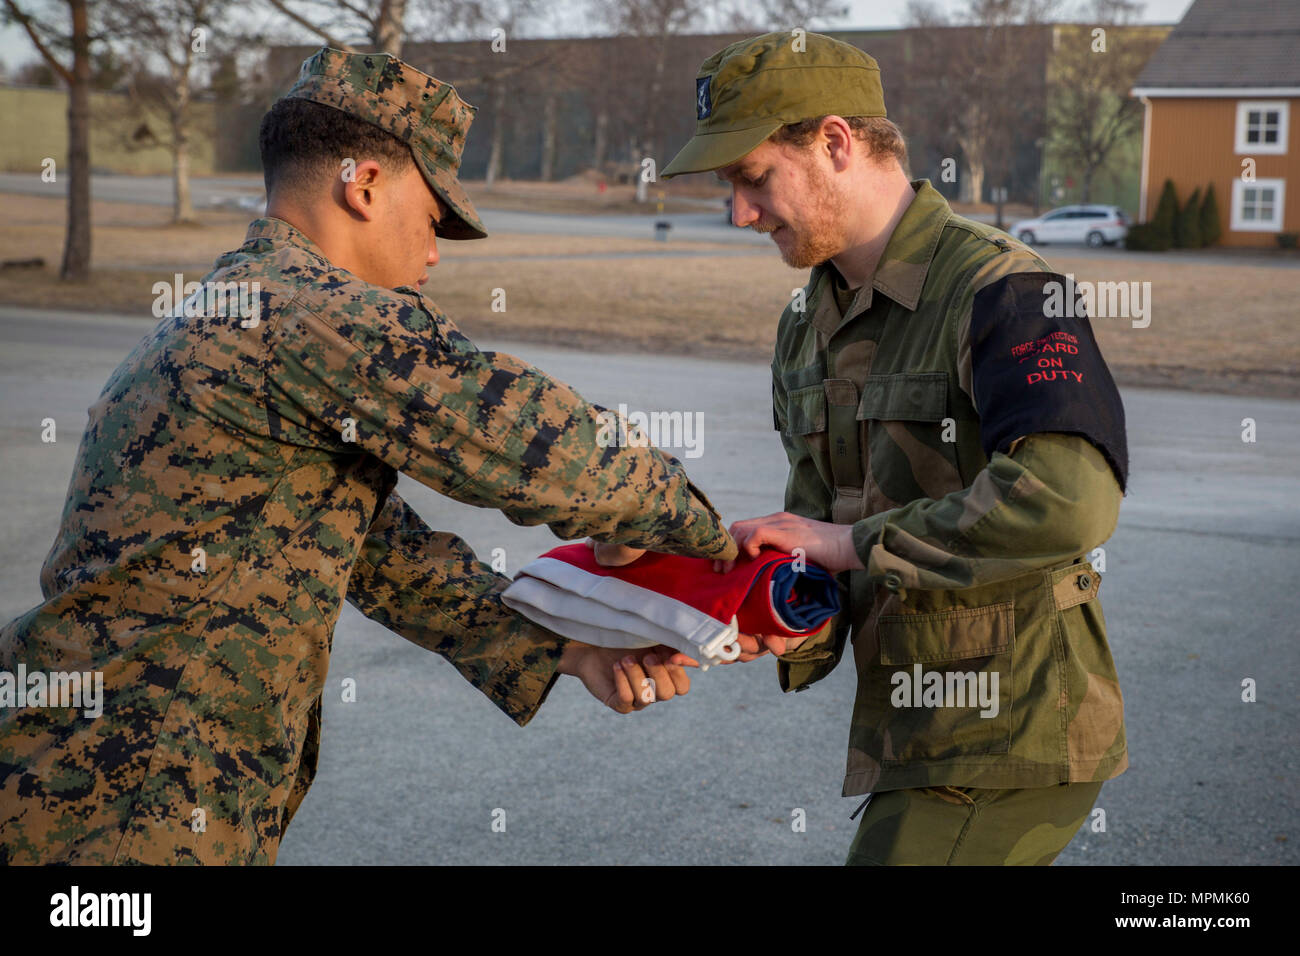 U.S. Marine Lance Cpl. Austin Robinson, a warehouse clerk with Marine Rotational Force Europe (MRF-E) 17.1, hands off the Norwegian flag at Vaernes Garnison, March 30, 2017. MRF-E uphold traditions while increasing interoperability with Allies and partner nations. (U.S. Marine Corps photo by Lance Cpl. Victoria Ross) Stock Photo